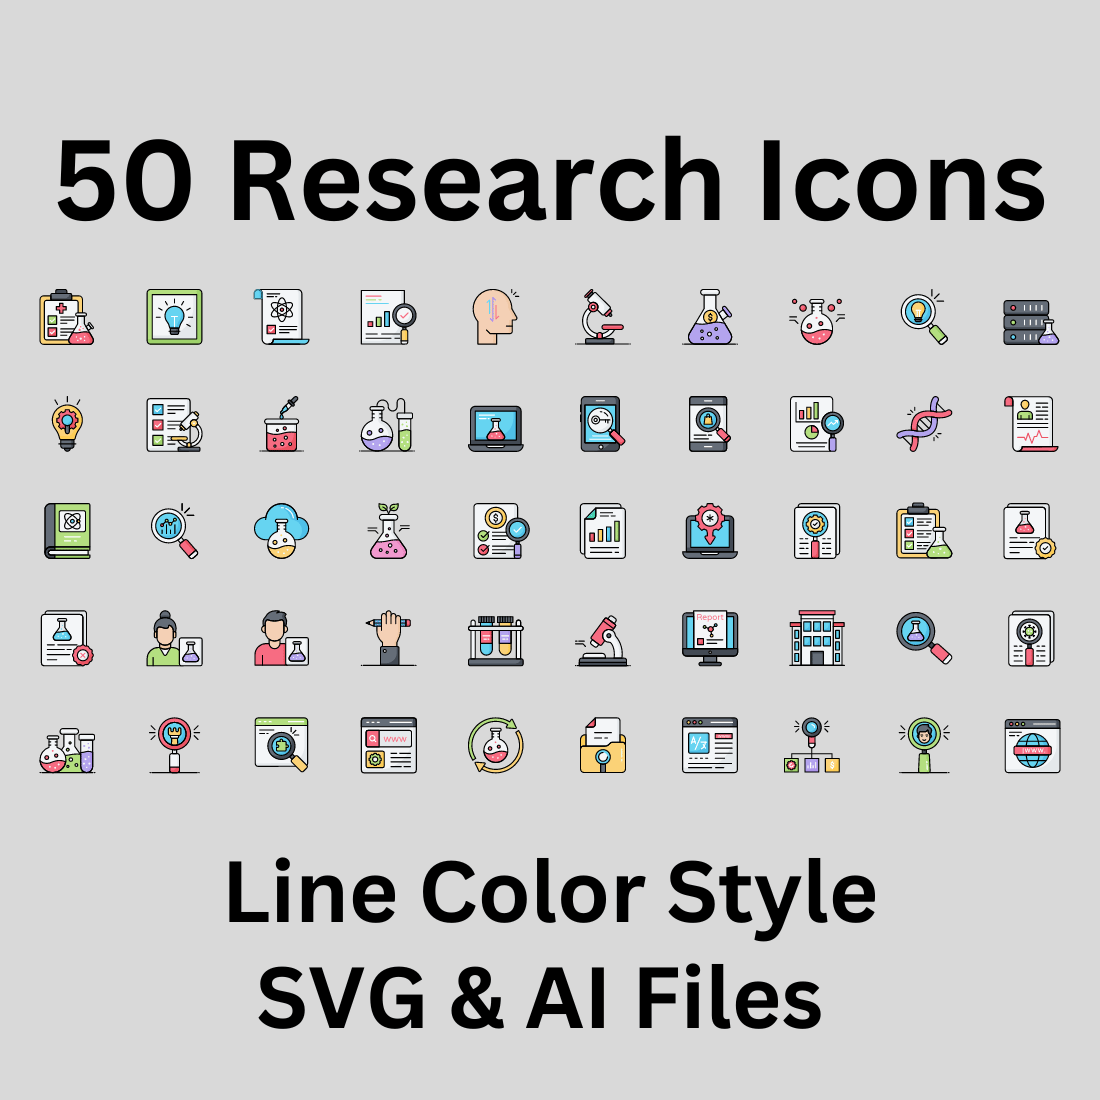 Research Icon Set 50 Line Color Icons - SVG And AI Files preview image.